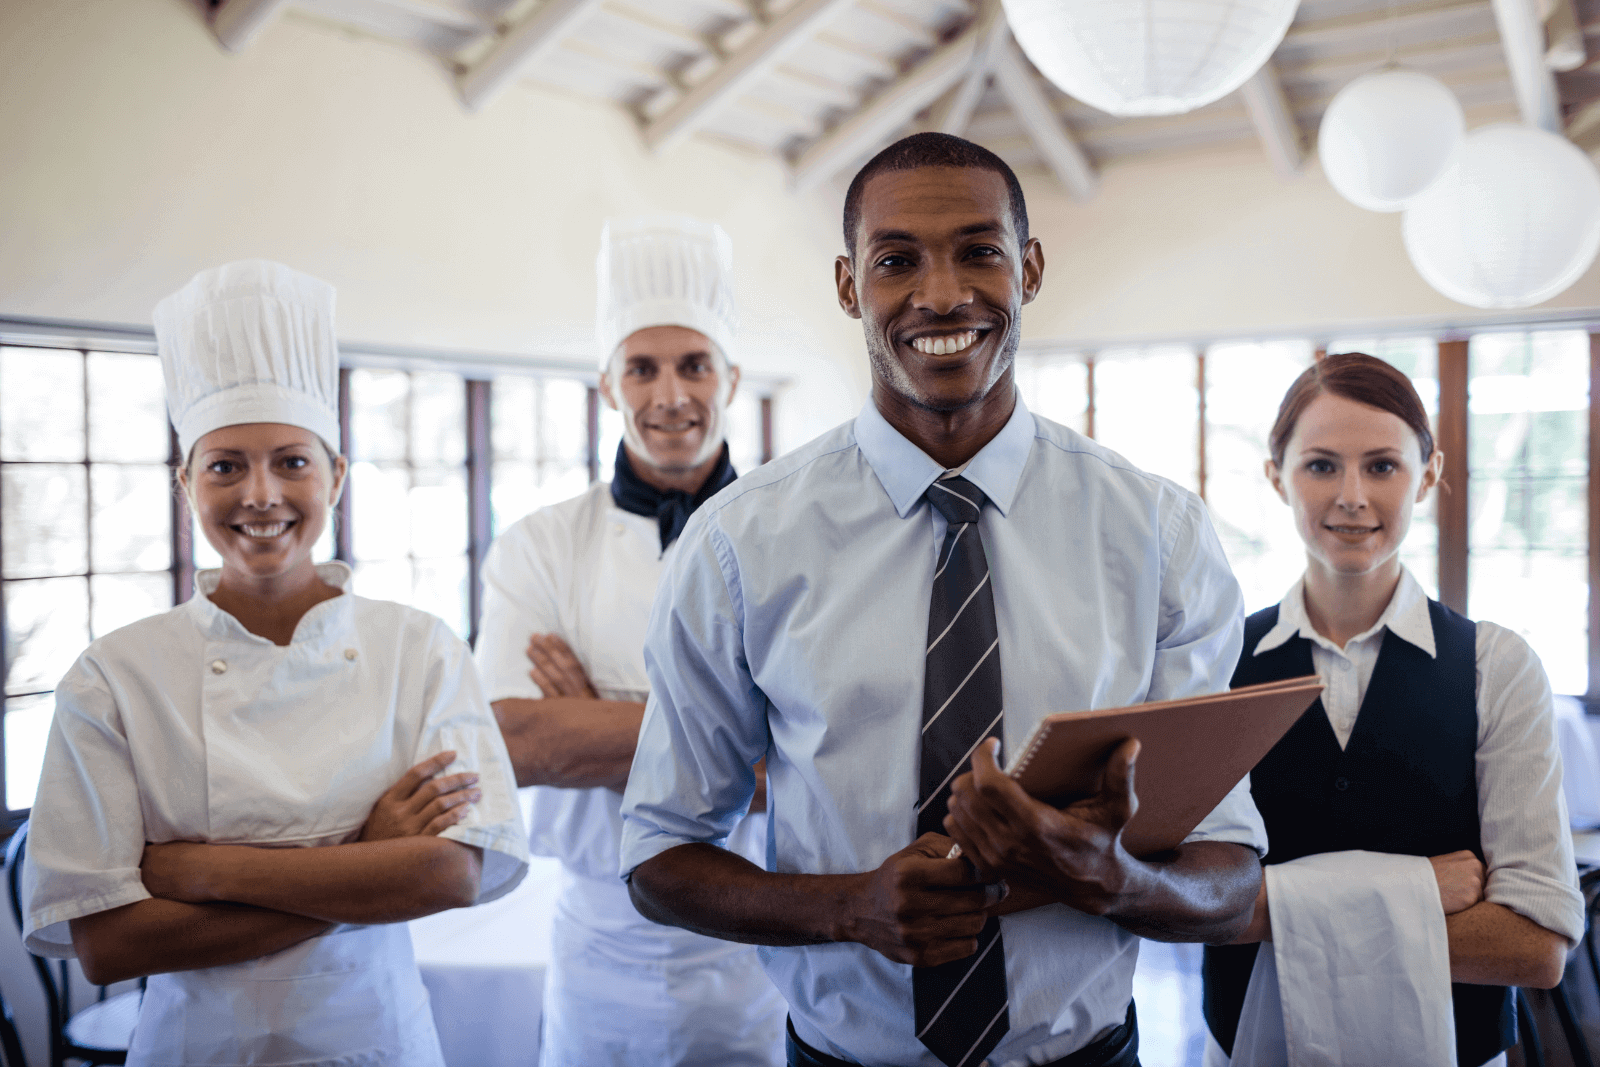 restaurant automation labor costs featured image